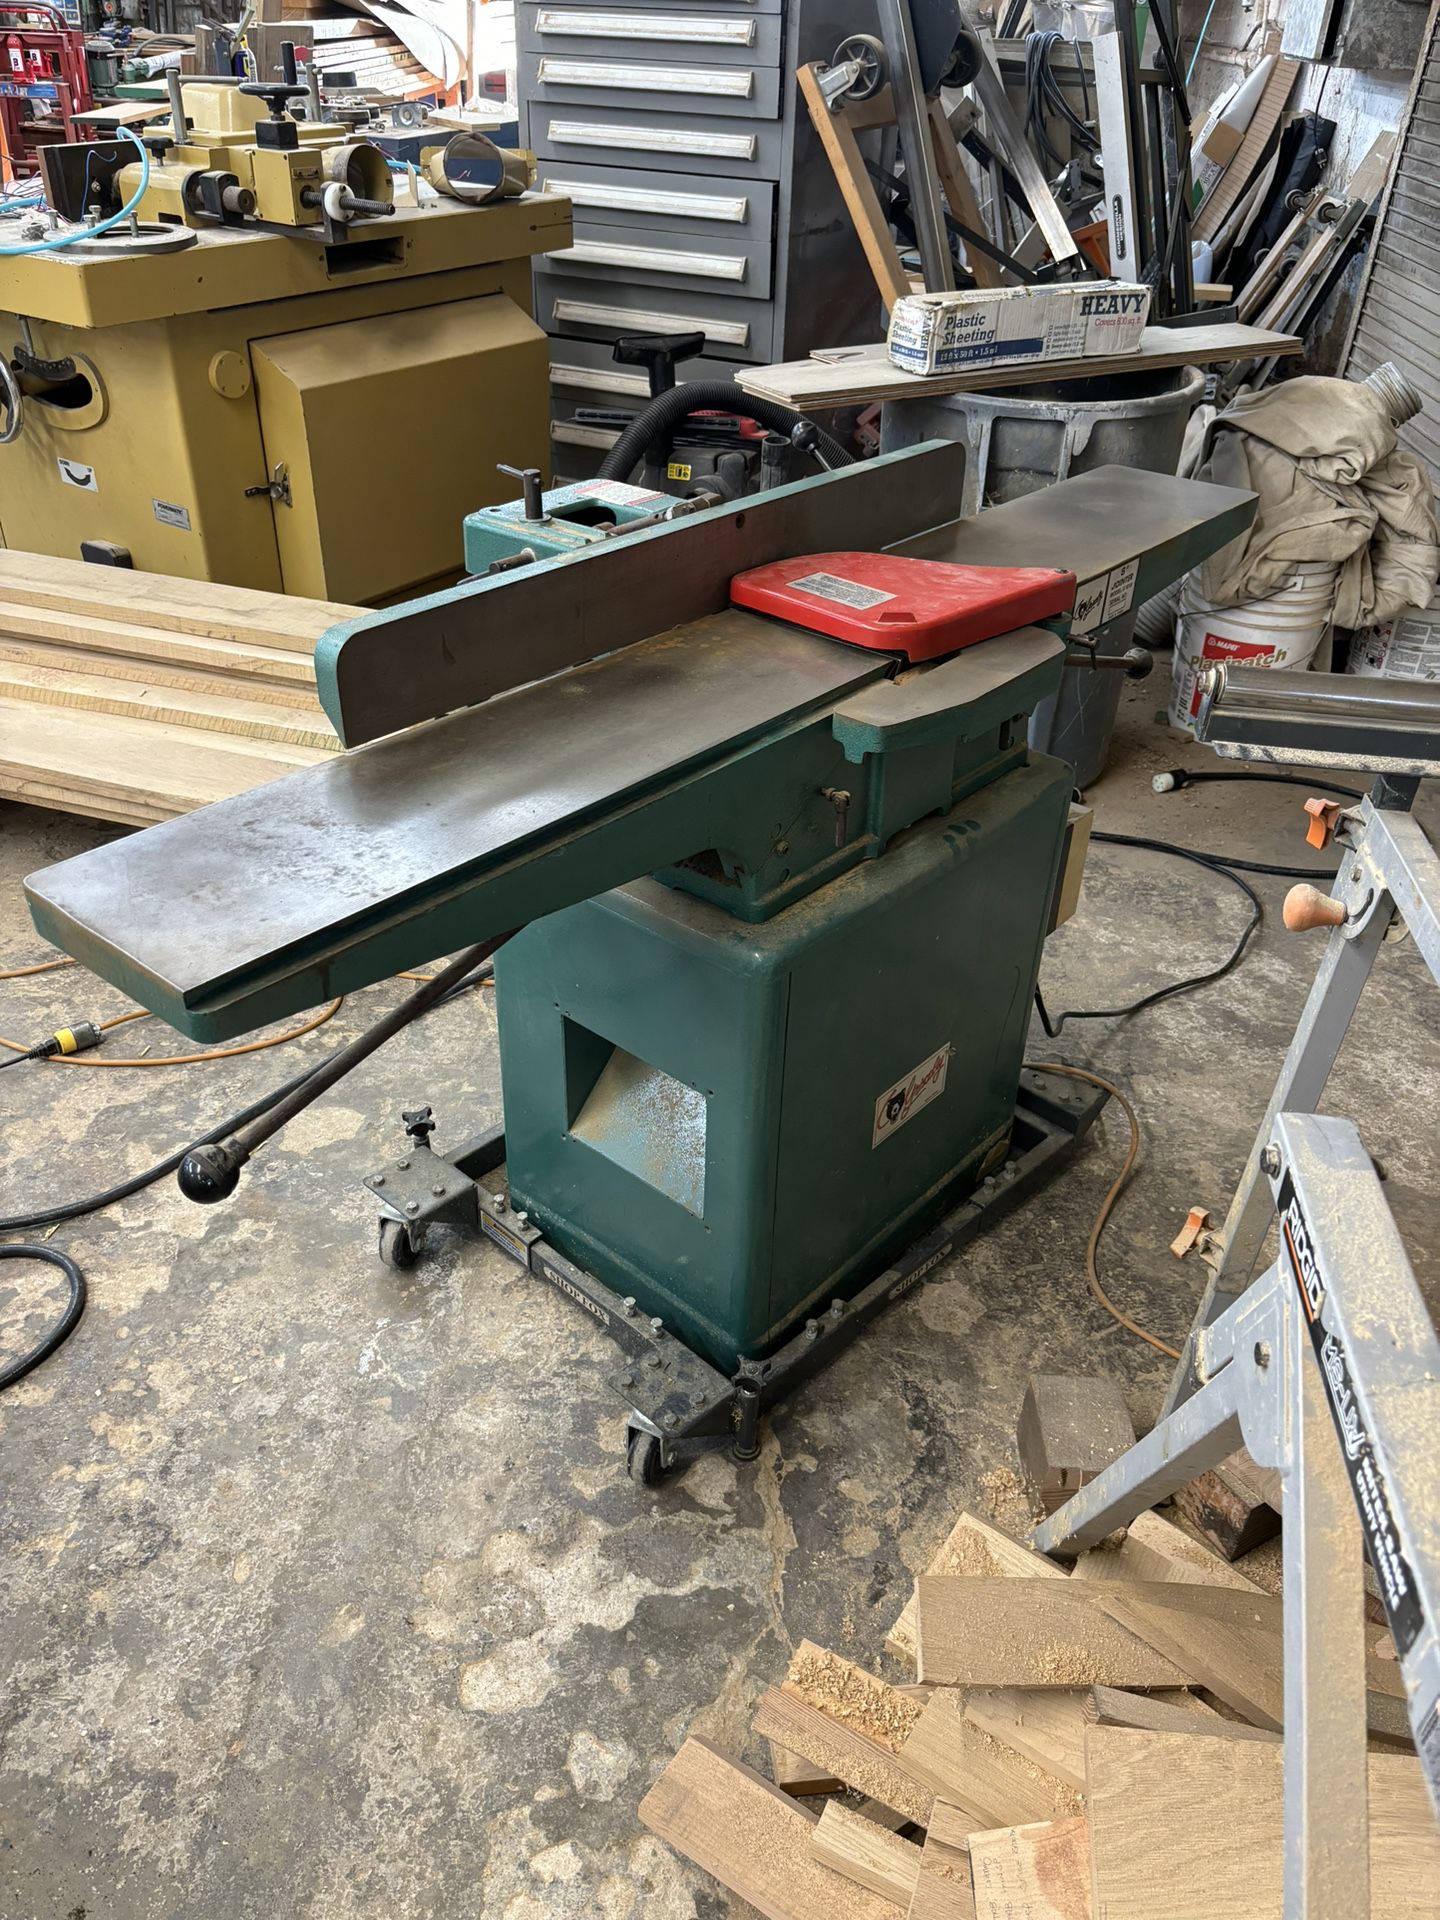 8” Jointer